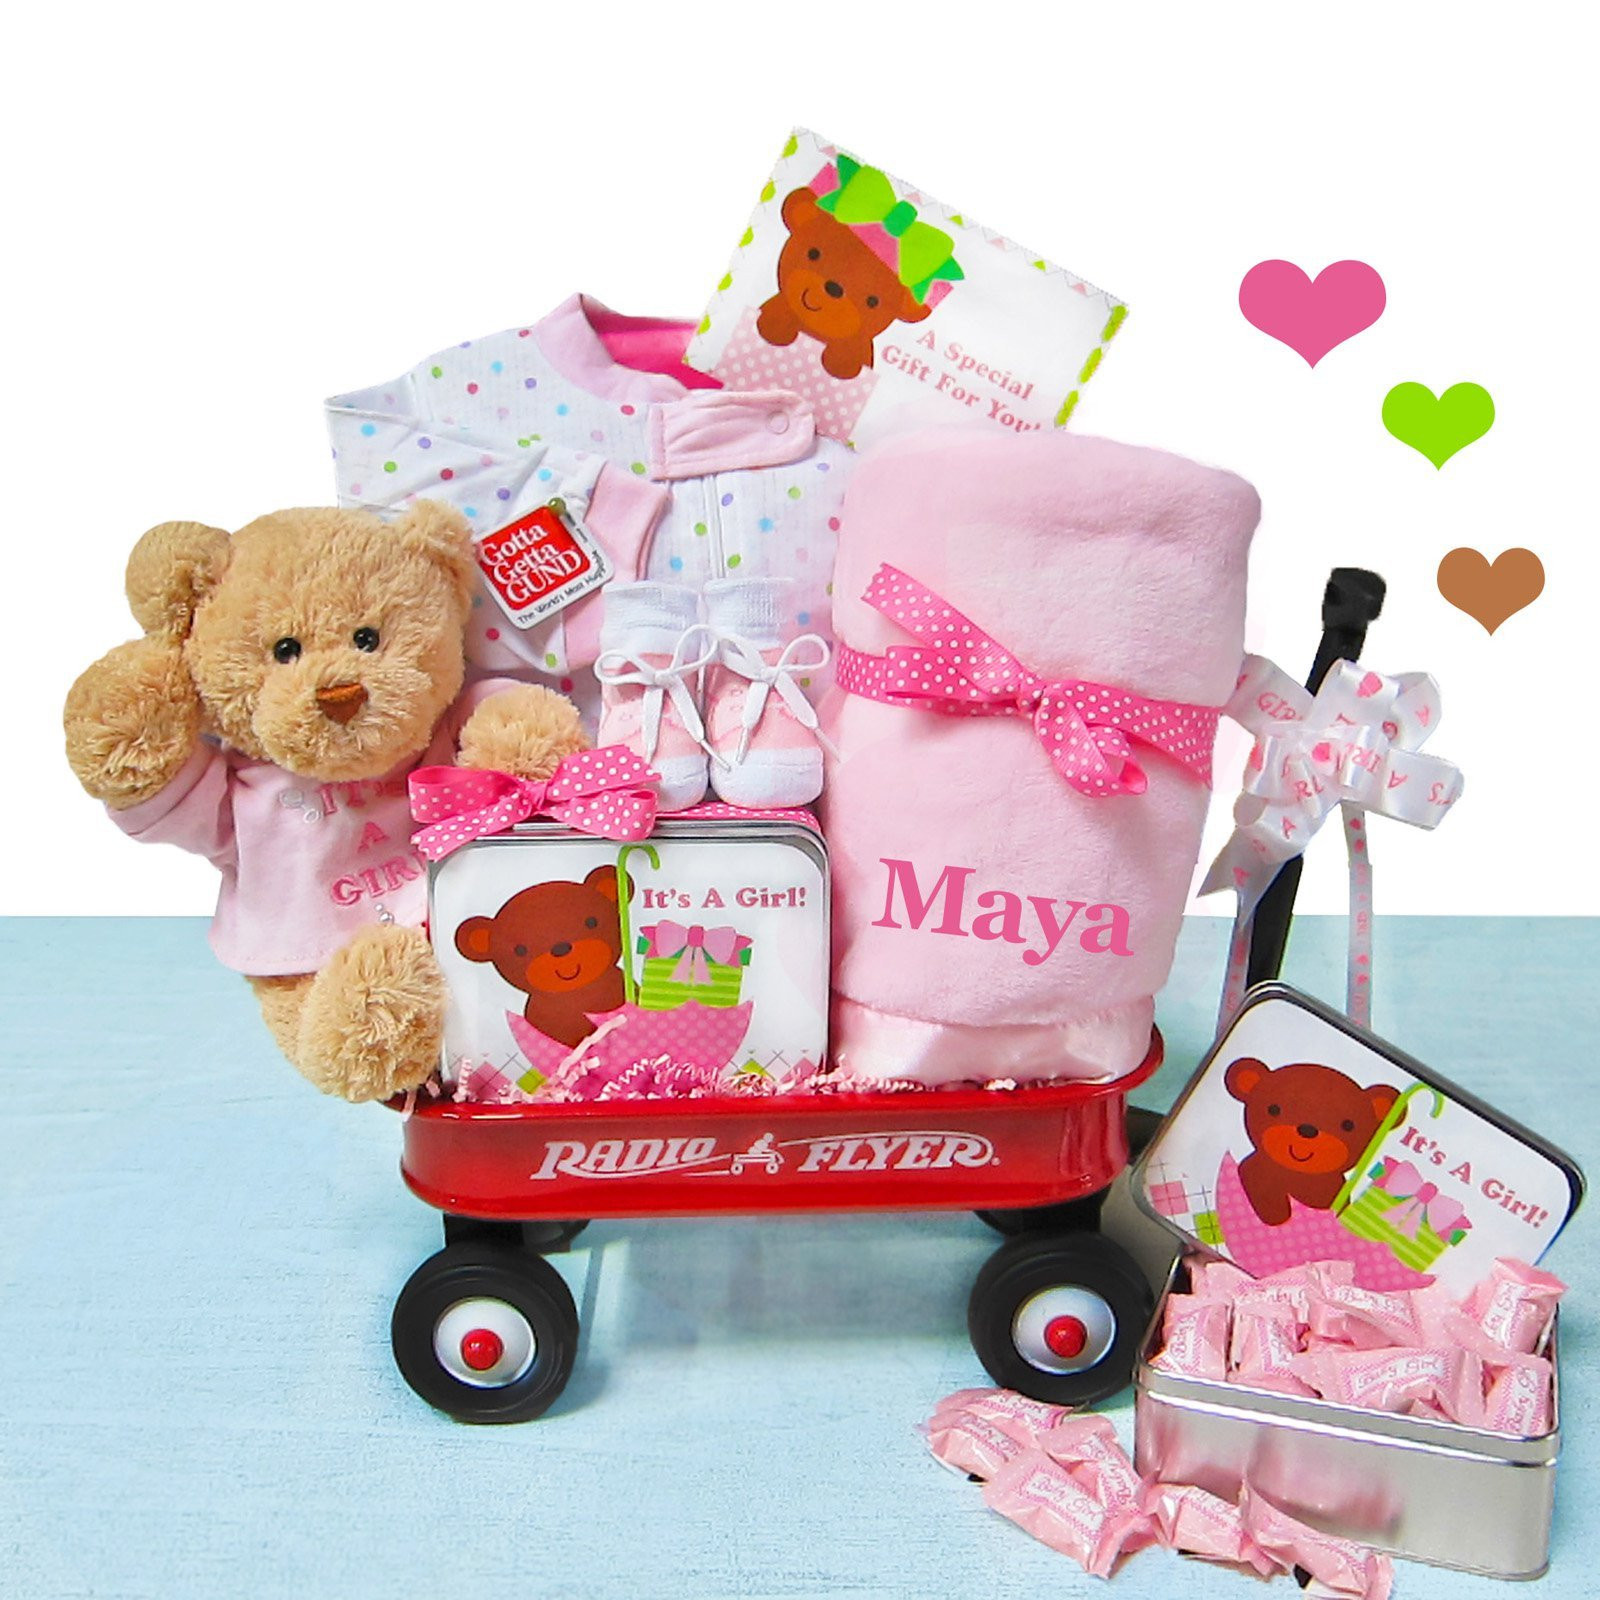 Gift Ideas For A Baby Girl
 It s A Baby Girl Wagon Gift Set – StorkBabyGiftBaskets